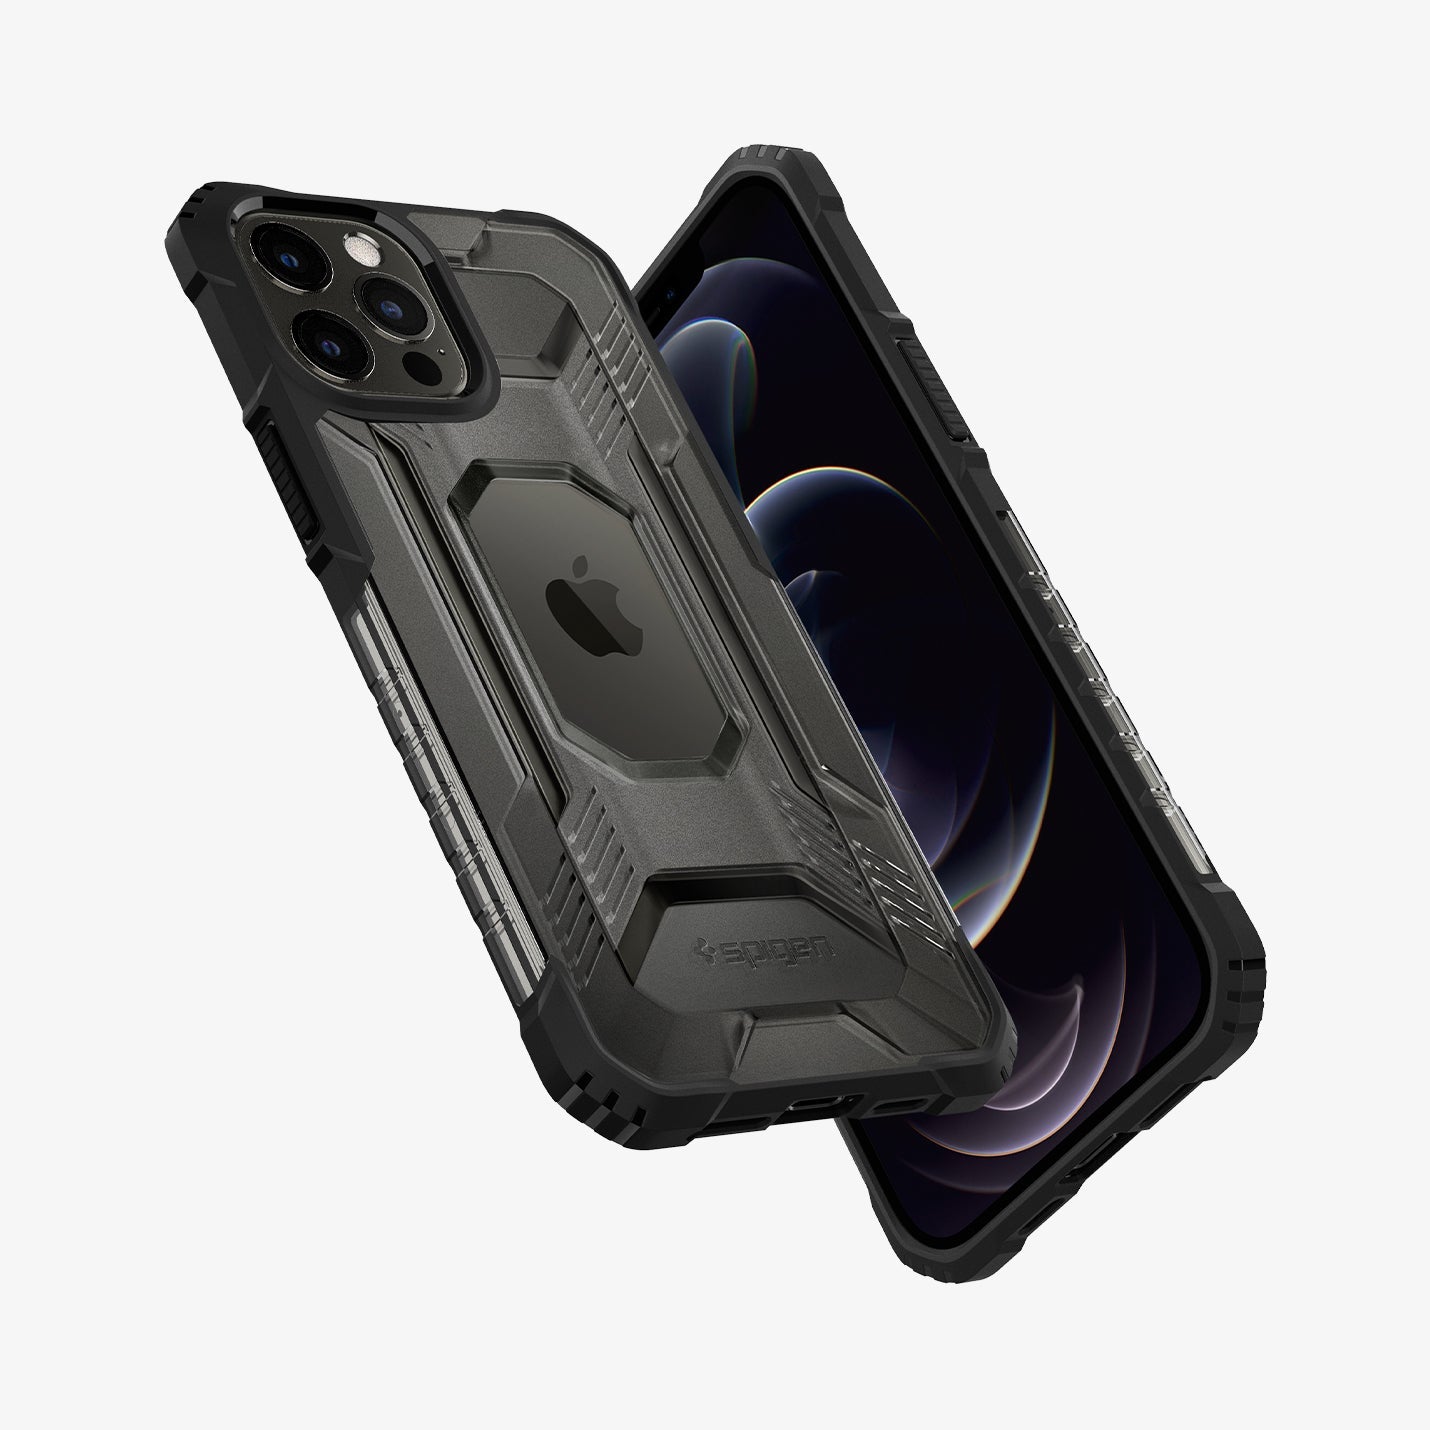 ACS02636 - iPhone 12 Pro Max Case Nitro Force in matte black showing the back, front and sides